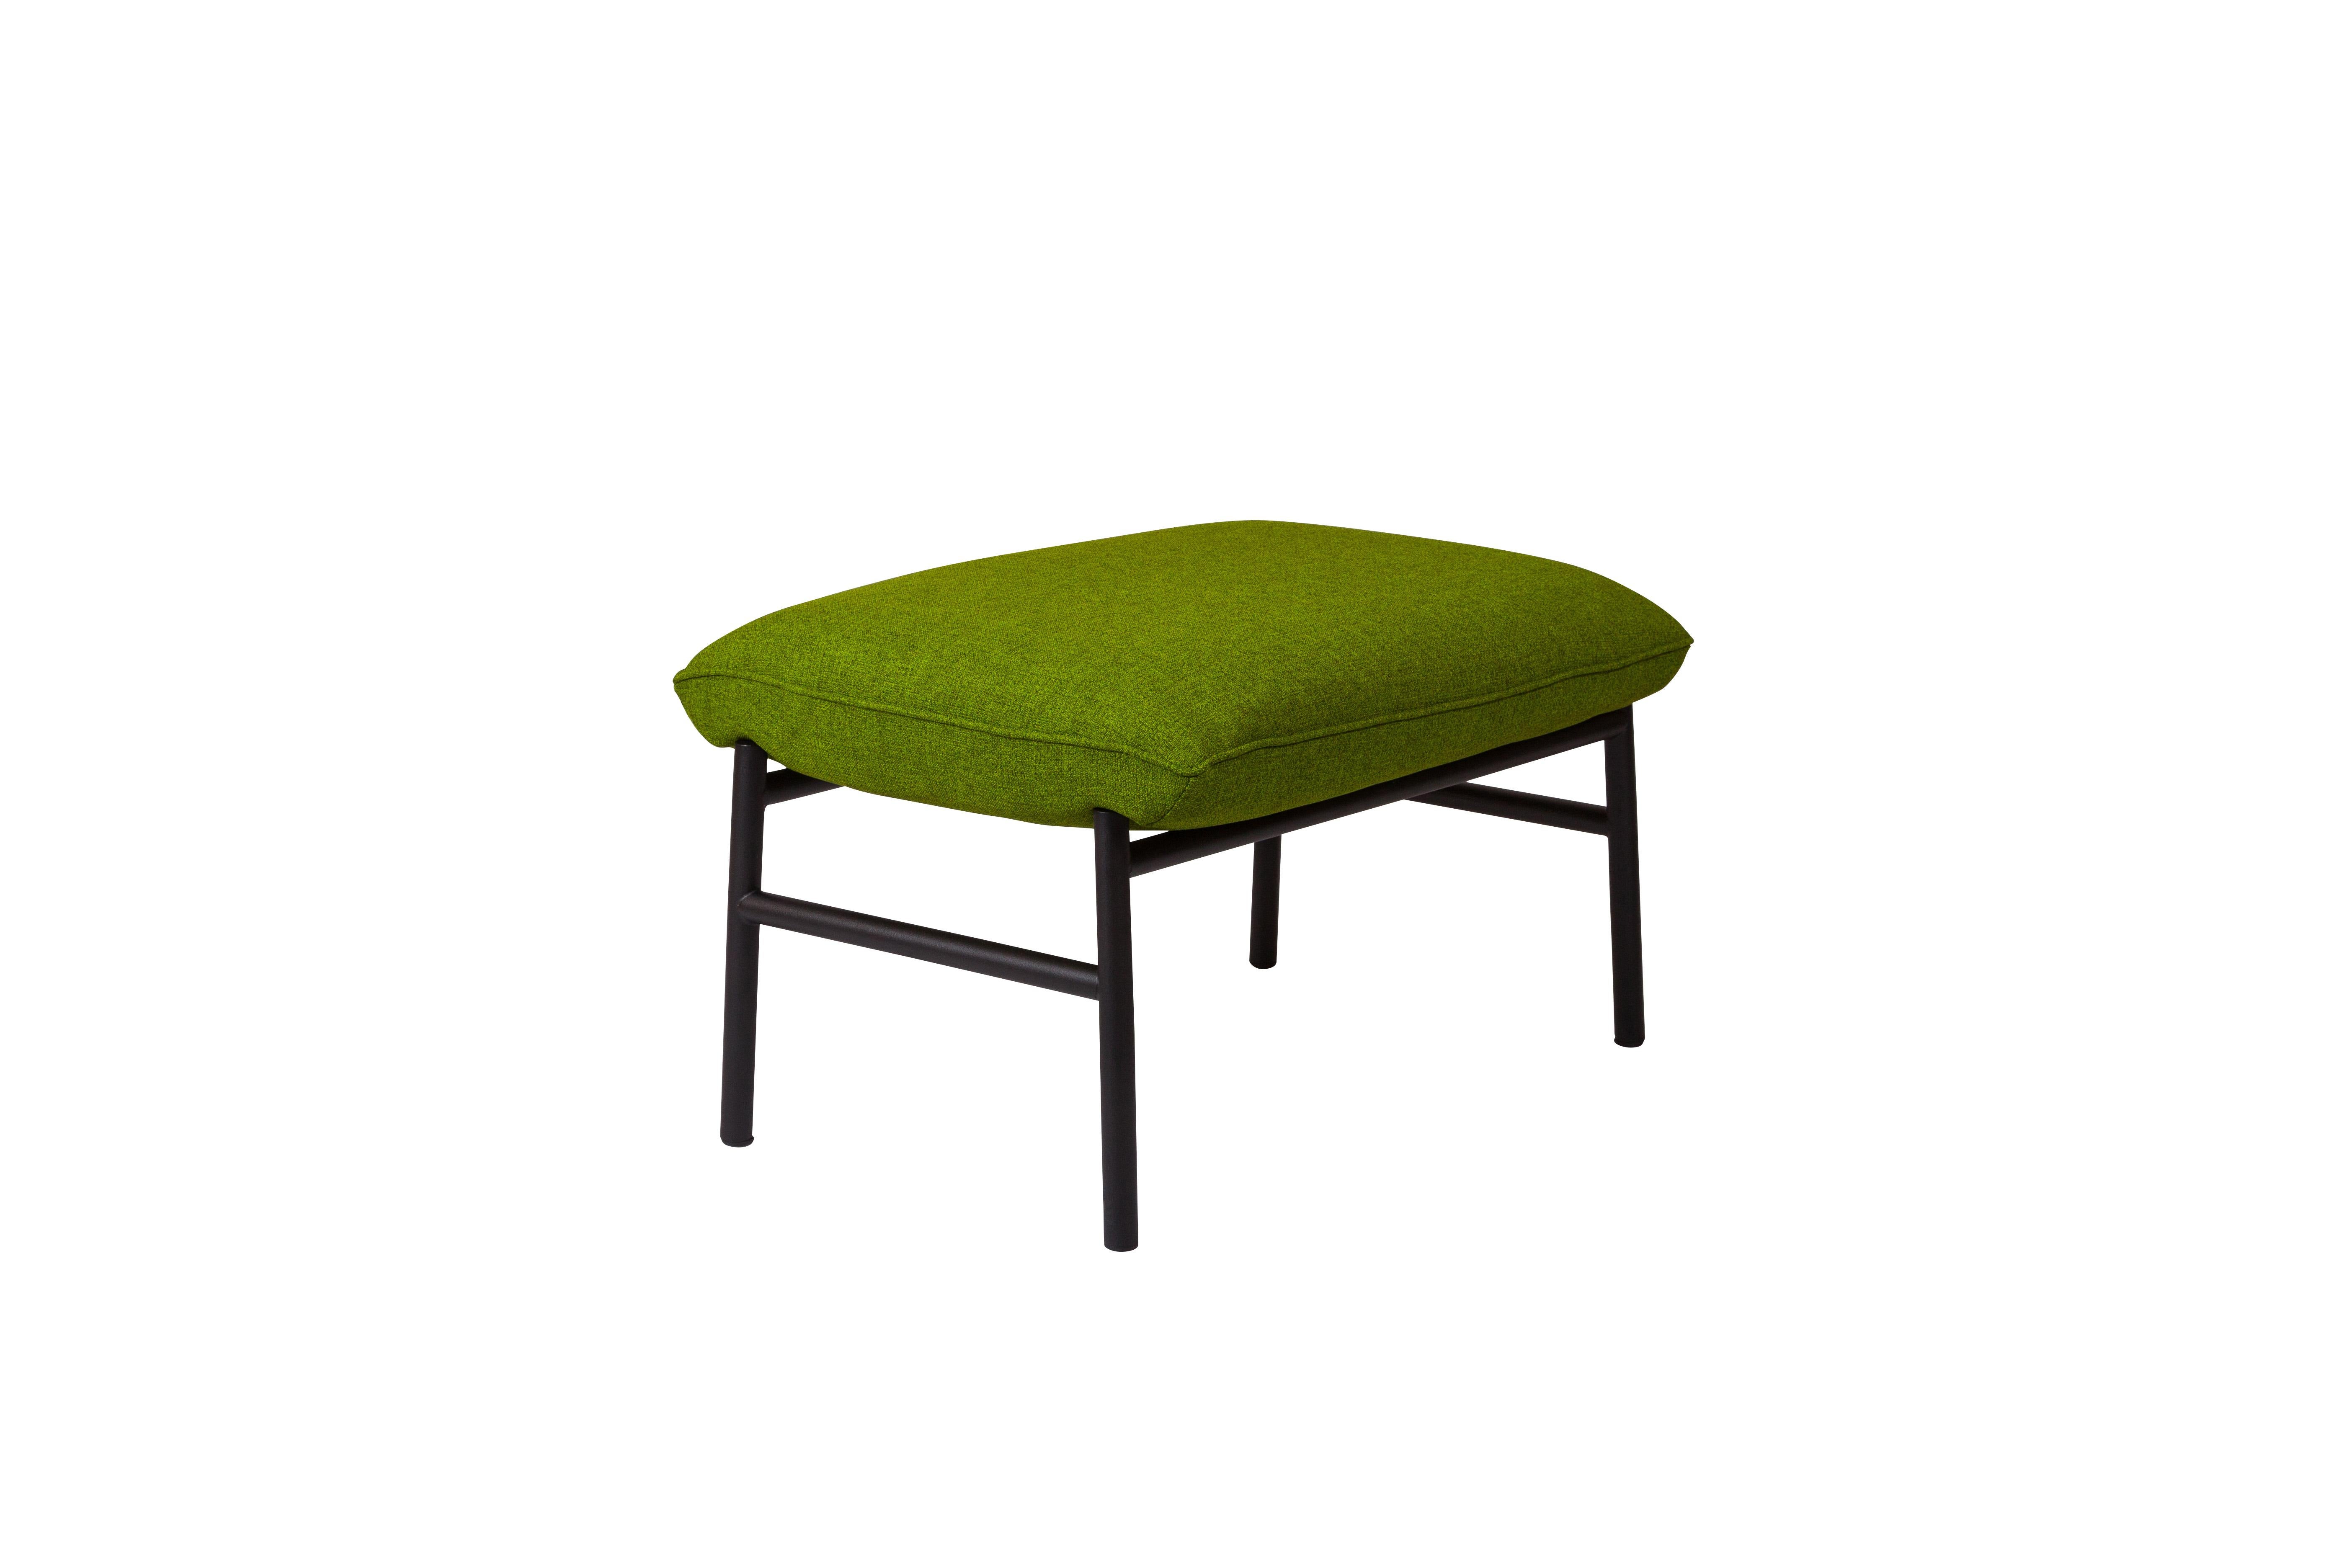 Fabric Henry Russell Green Ottoman Stainless Steel Frame For Sale